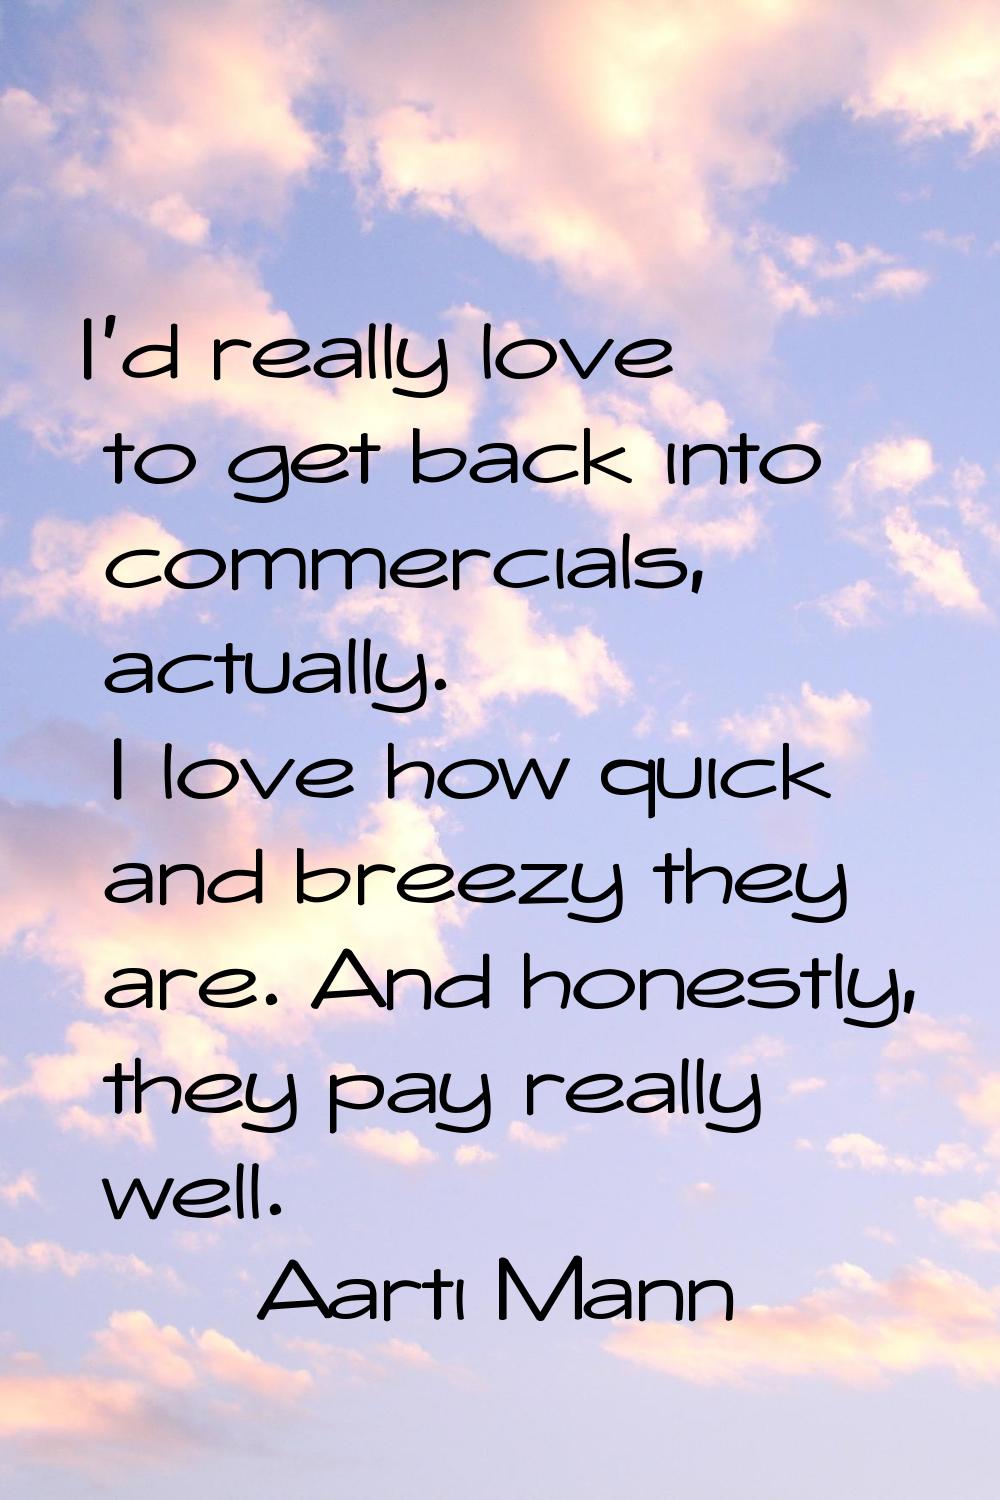 I'd really love to get back into commercials, actually. I love how quick and breezy they are. And h